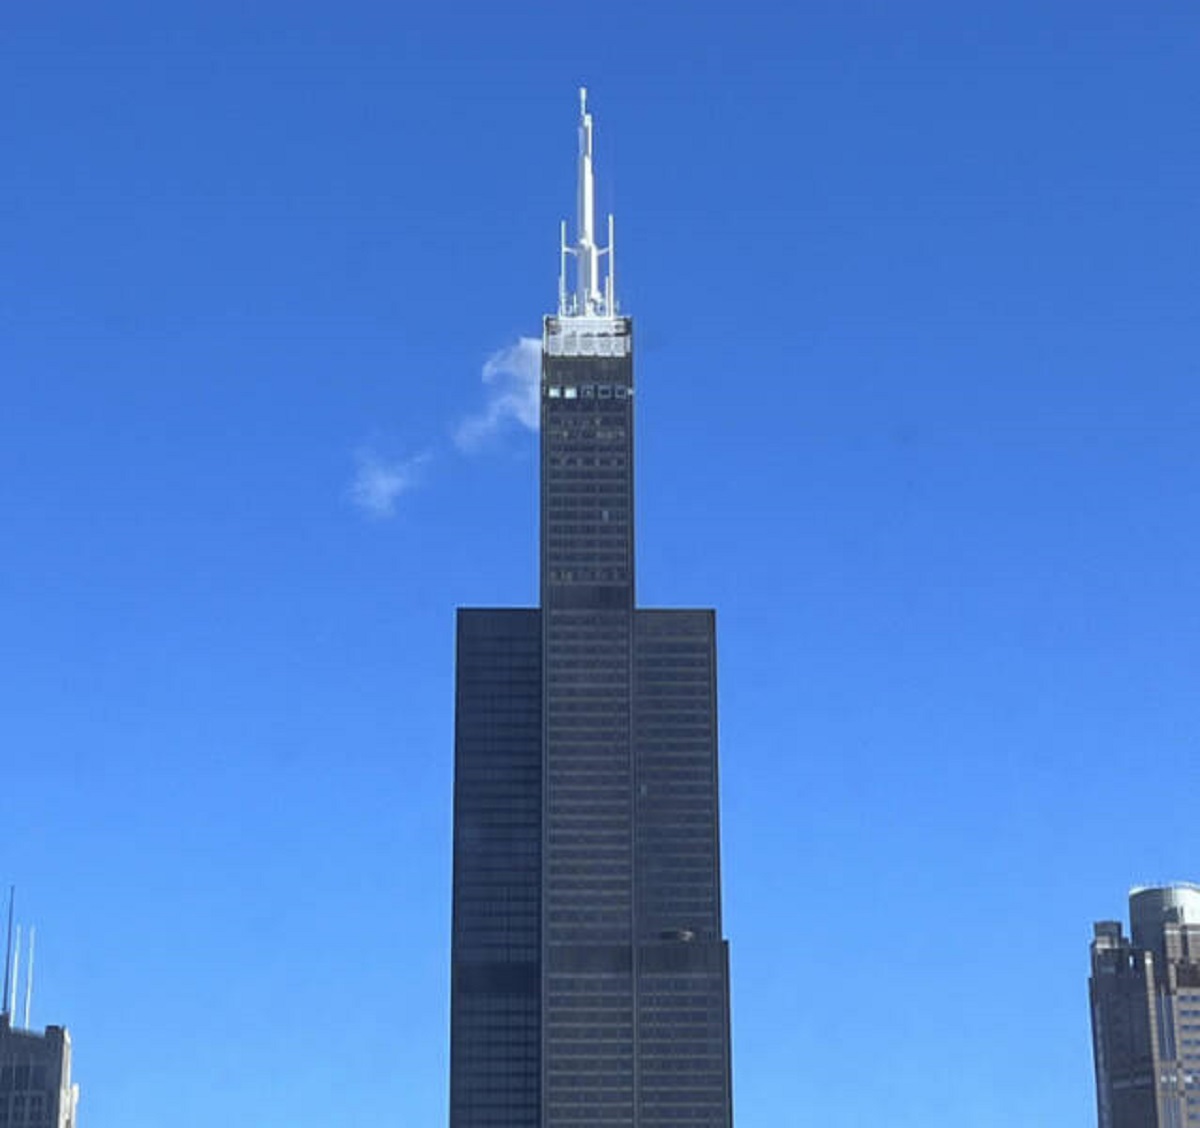 “It’s so cold in Chicago that the top of the Willis Tower is frozen.”